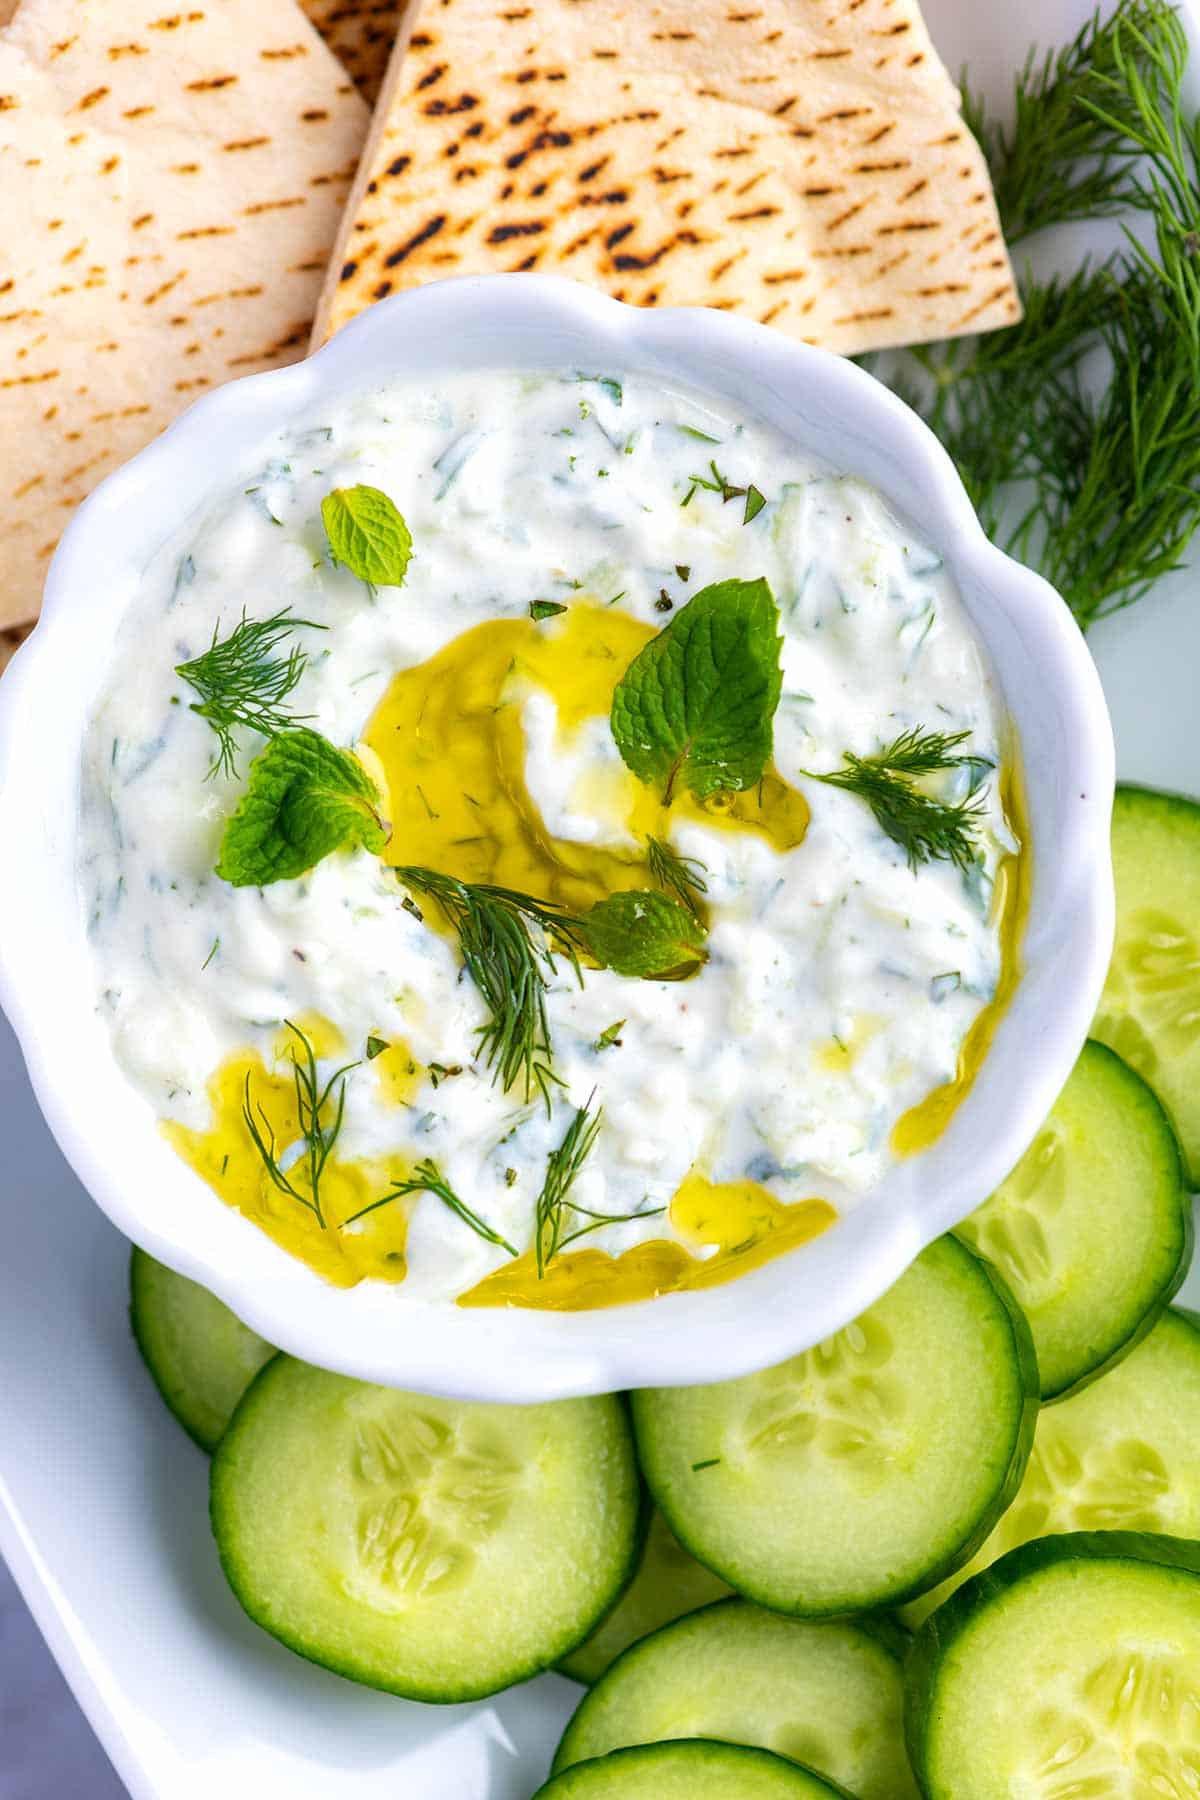 Tzatziki is a creamy, delicious, and simple sauce made with cucumber, yogurt, and fresh herbs.